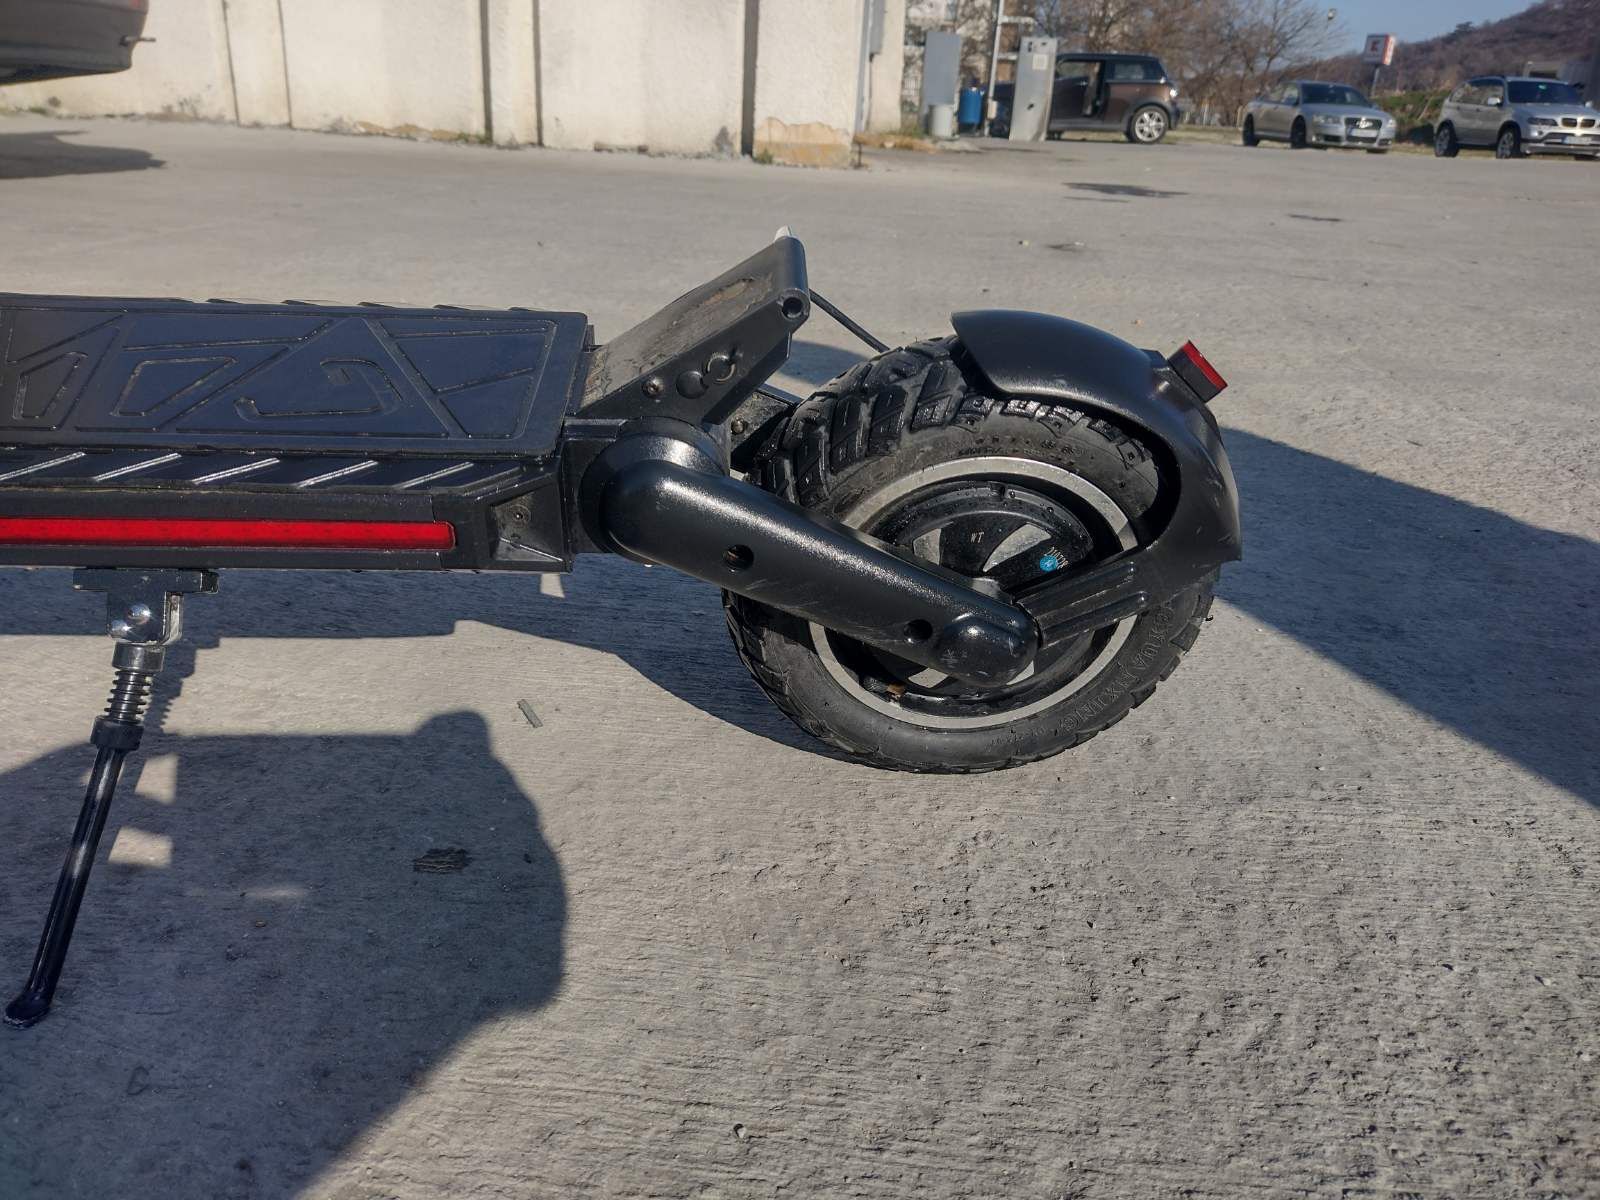 Kugoo 2 PRO electric scooter